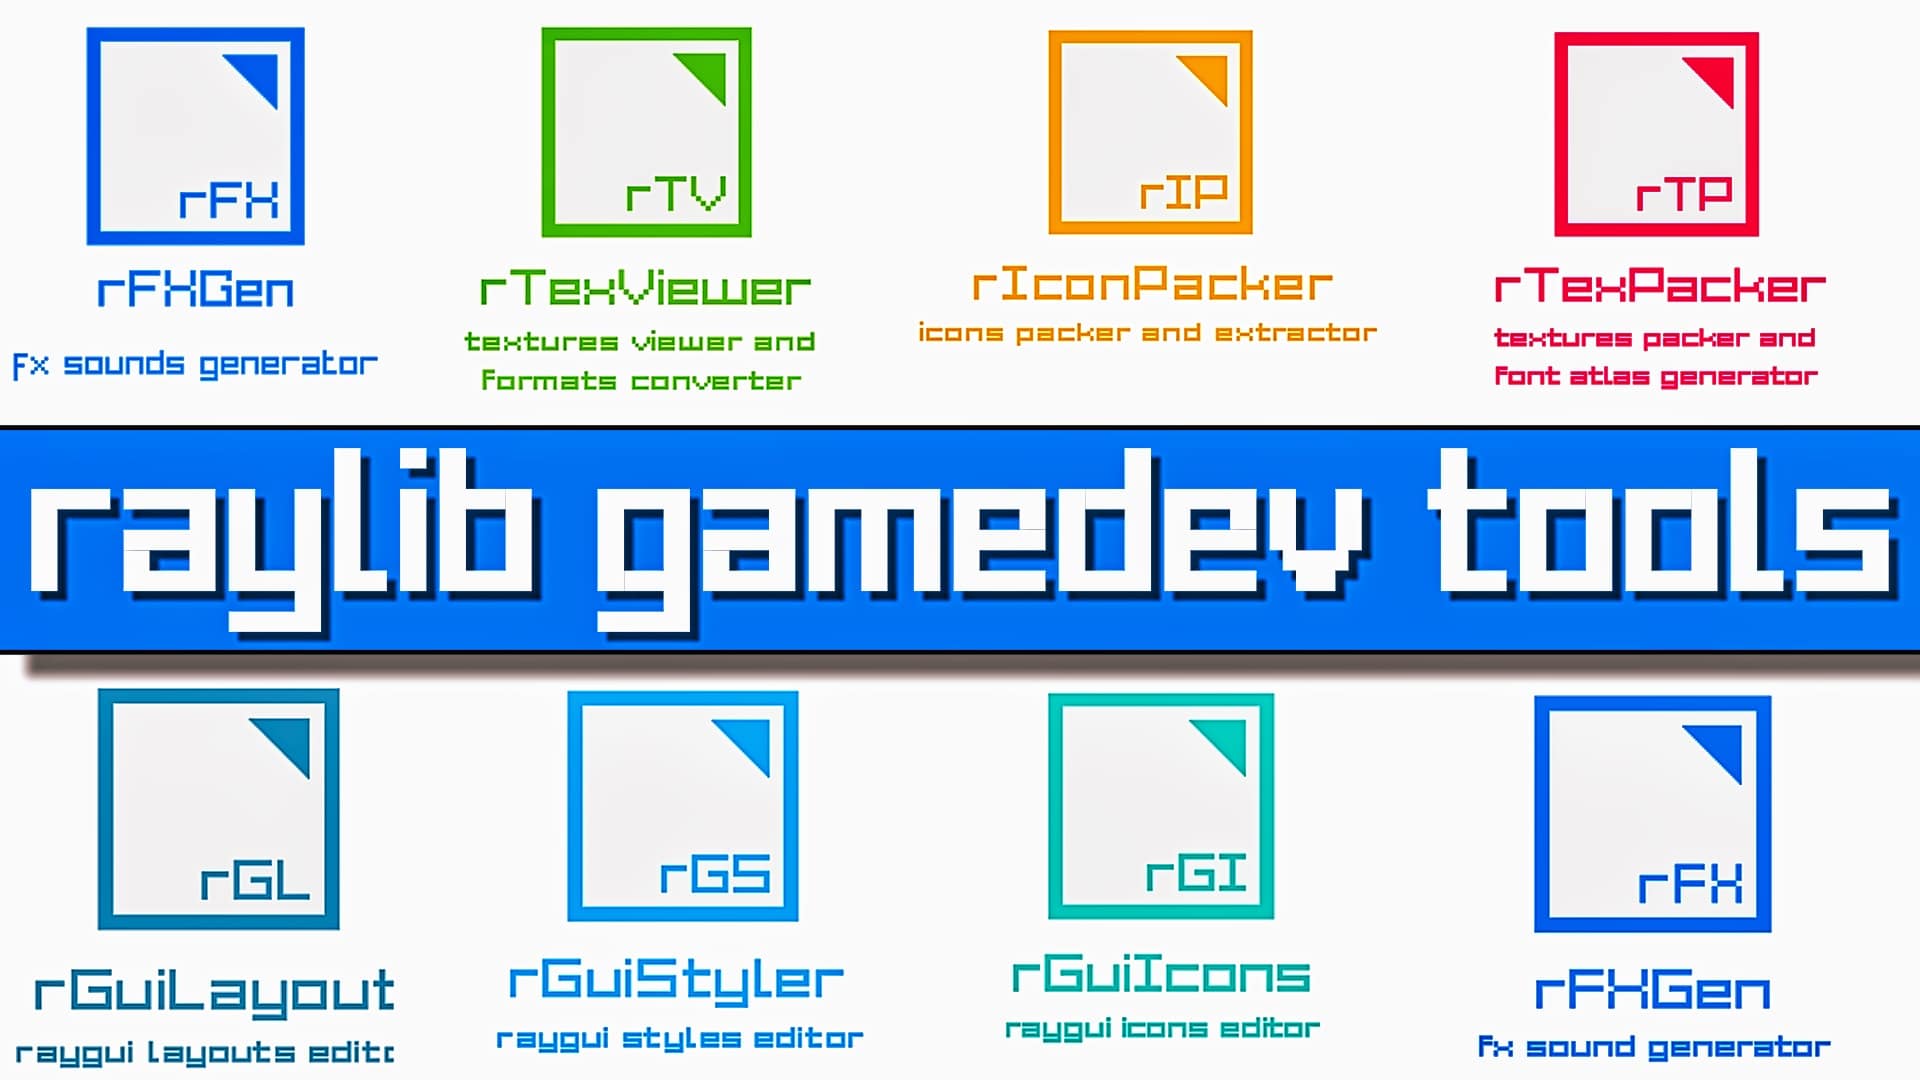 Download Game Android Di Revdl - Colaboratory